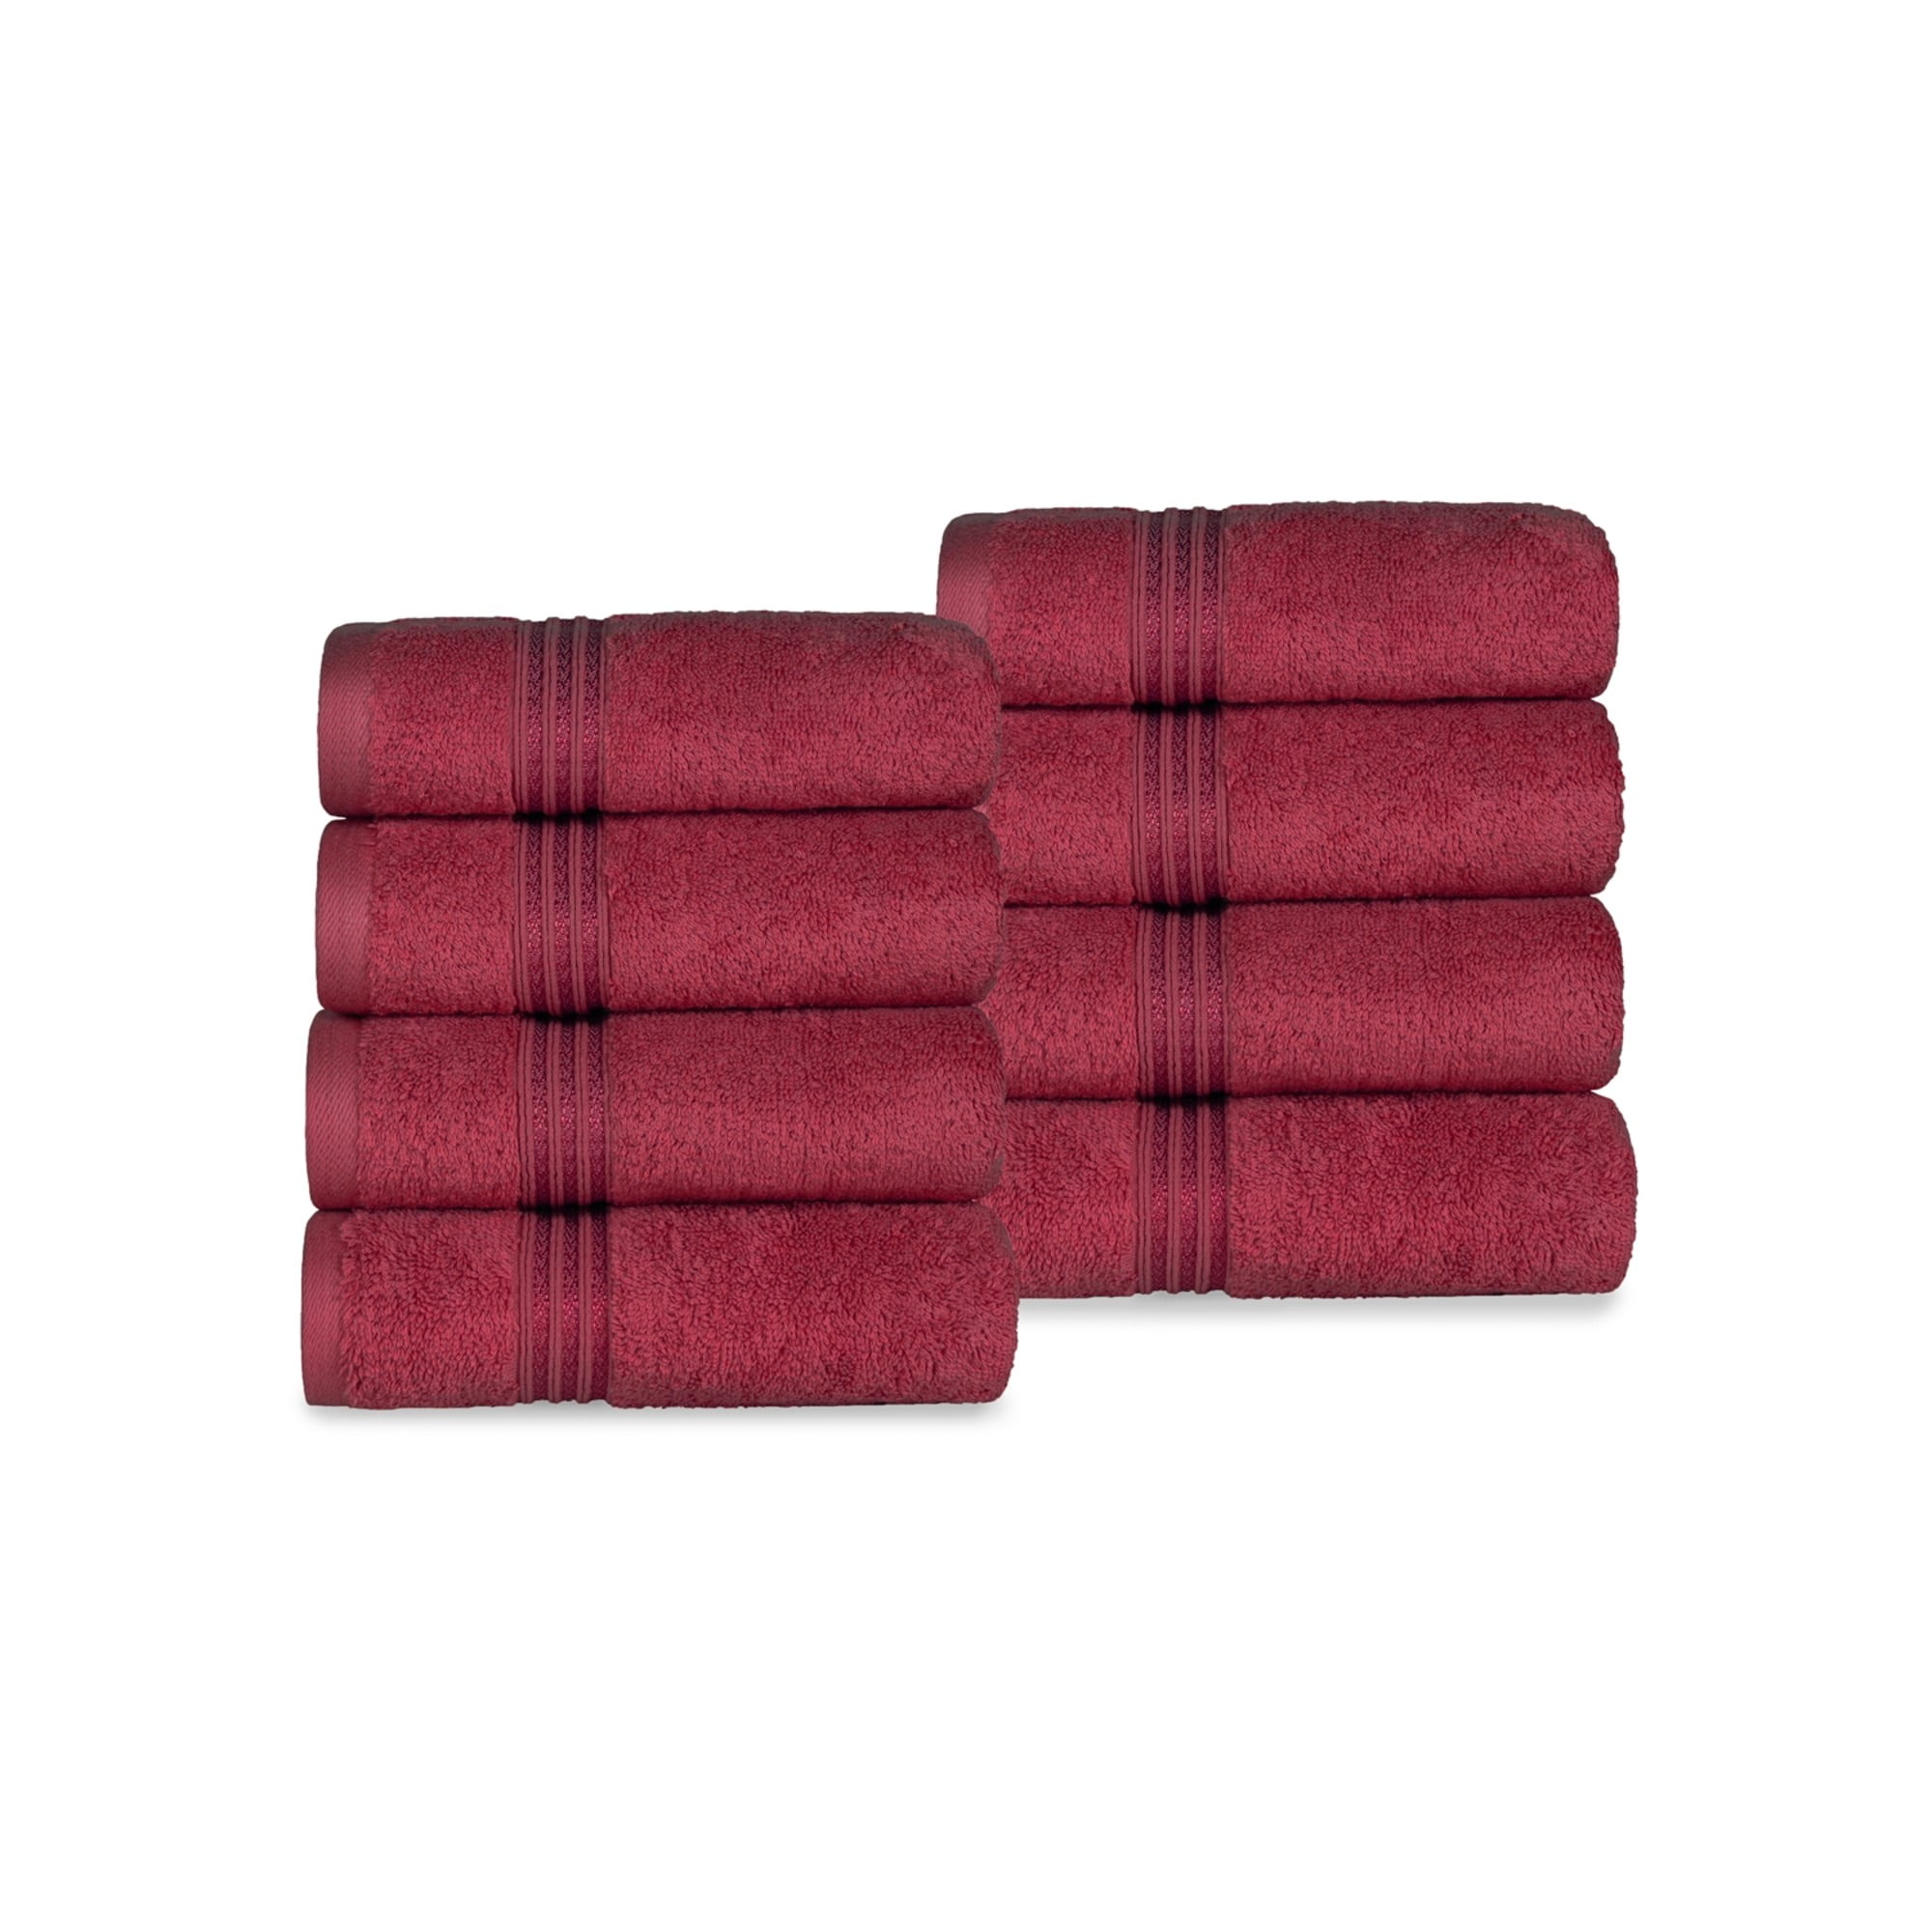 Spa Collection 100% EGYPTIAN COTTON TOWEL LUXURY COMBED SUPERSOFT 550 GSM HAND BATH TOWEL SHEET Red, Bath Sheet